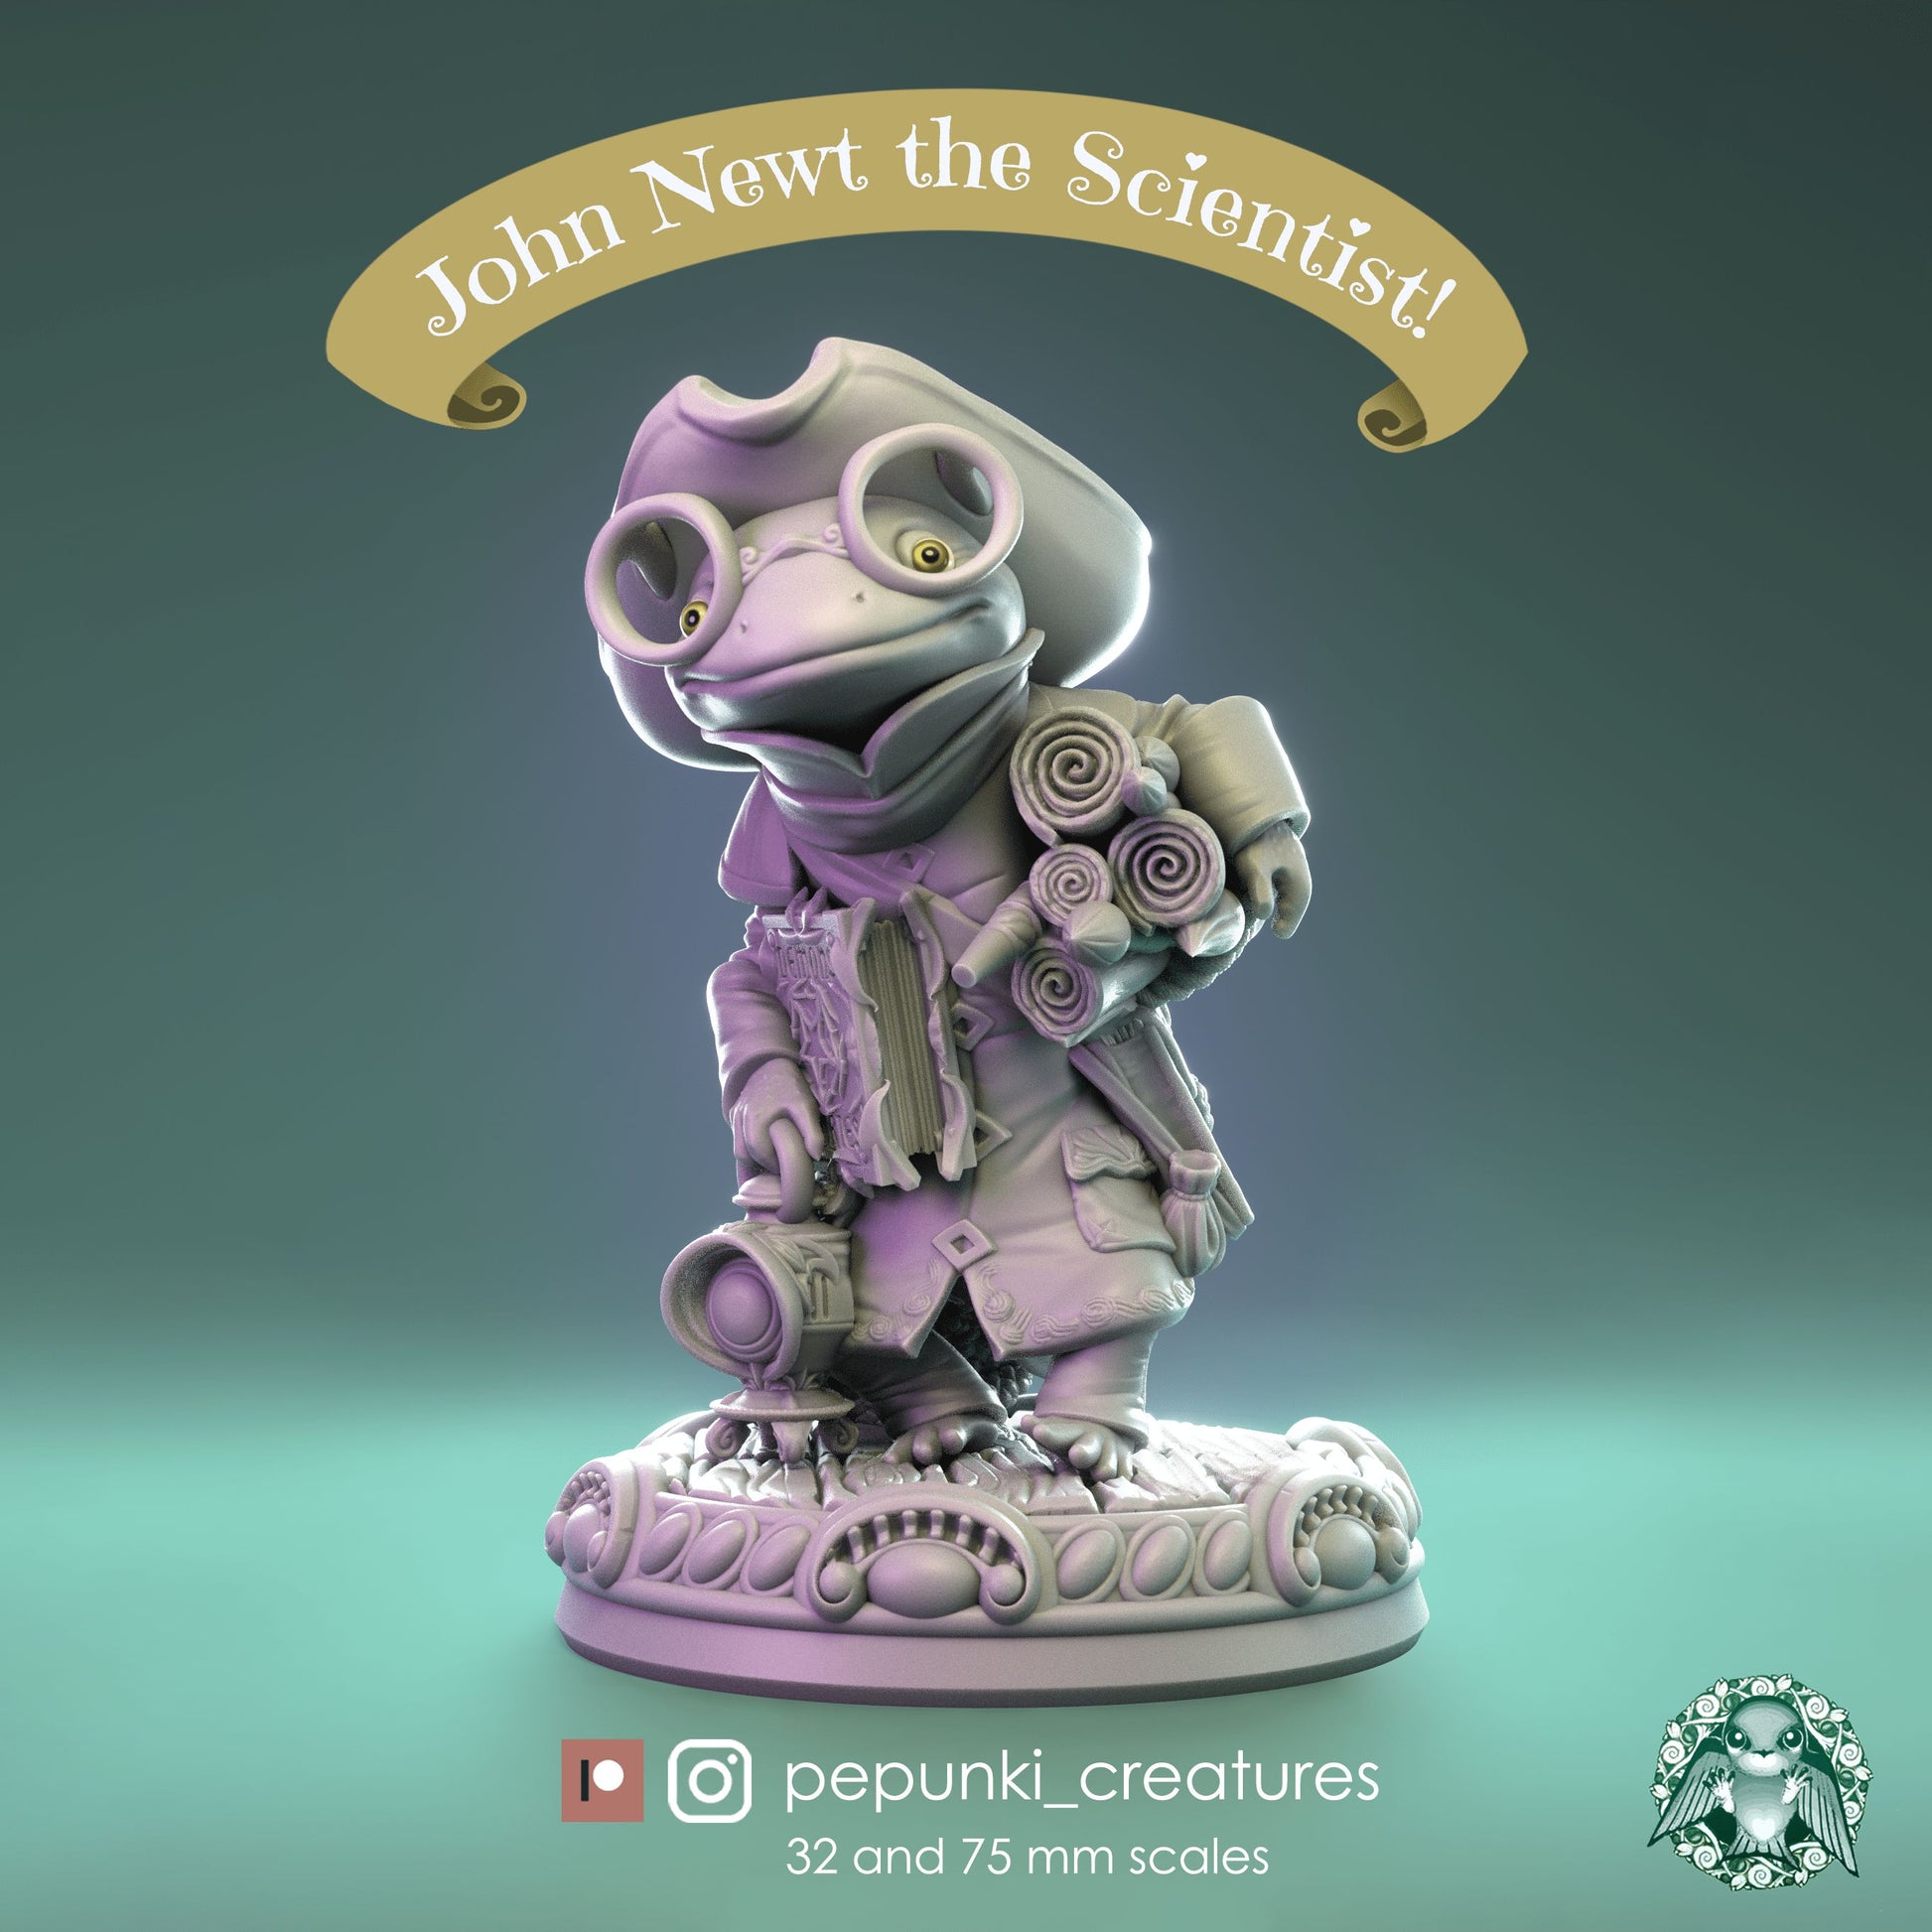 John Newt the Scientist | Dungeons and Dragons Tabletop Roleplaying Game Miniature | Pepunki Miniatures - Tattles Told 3D